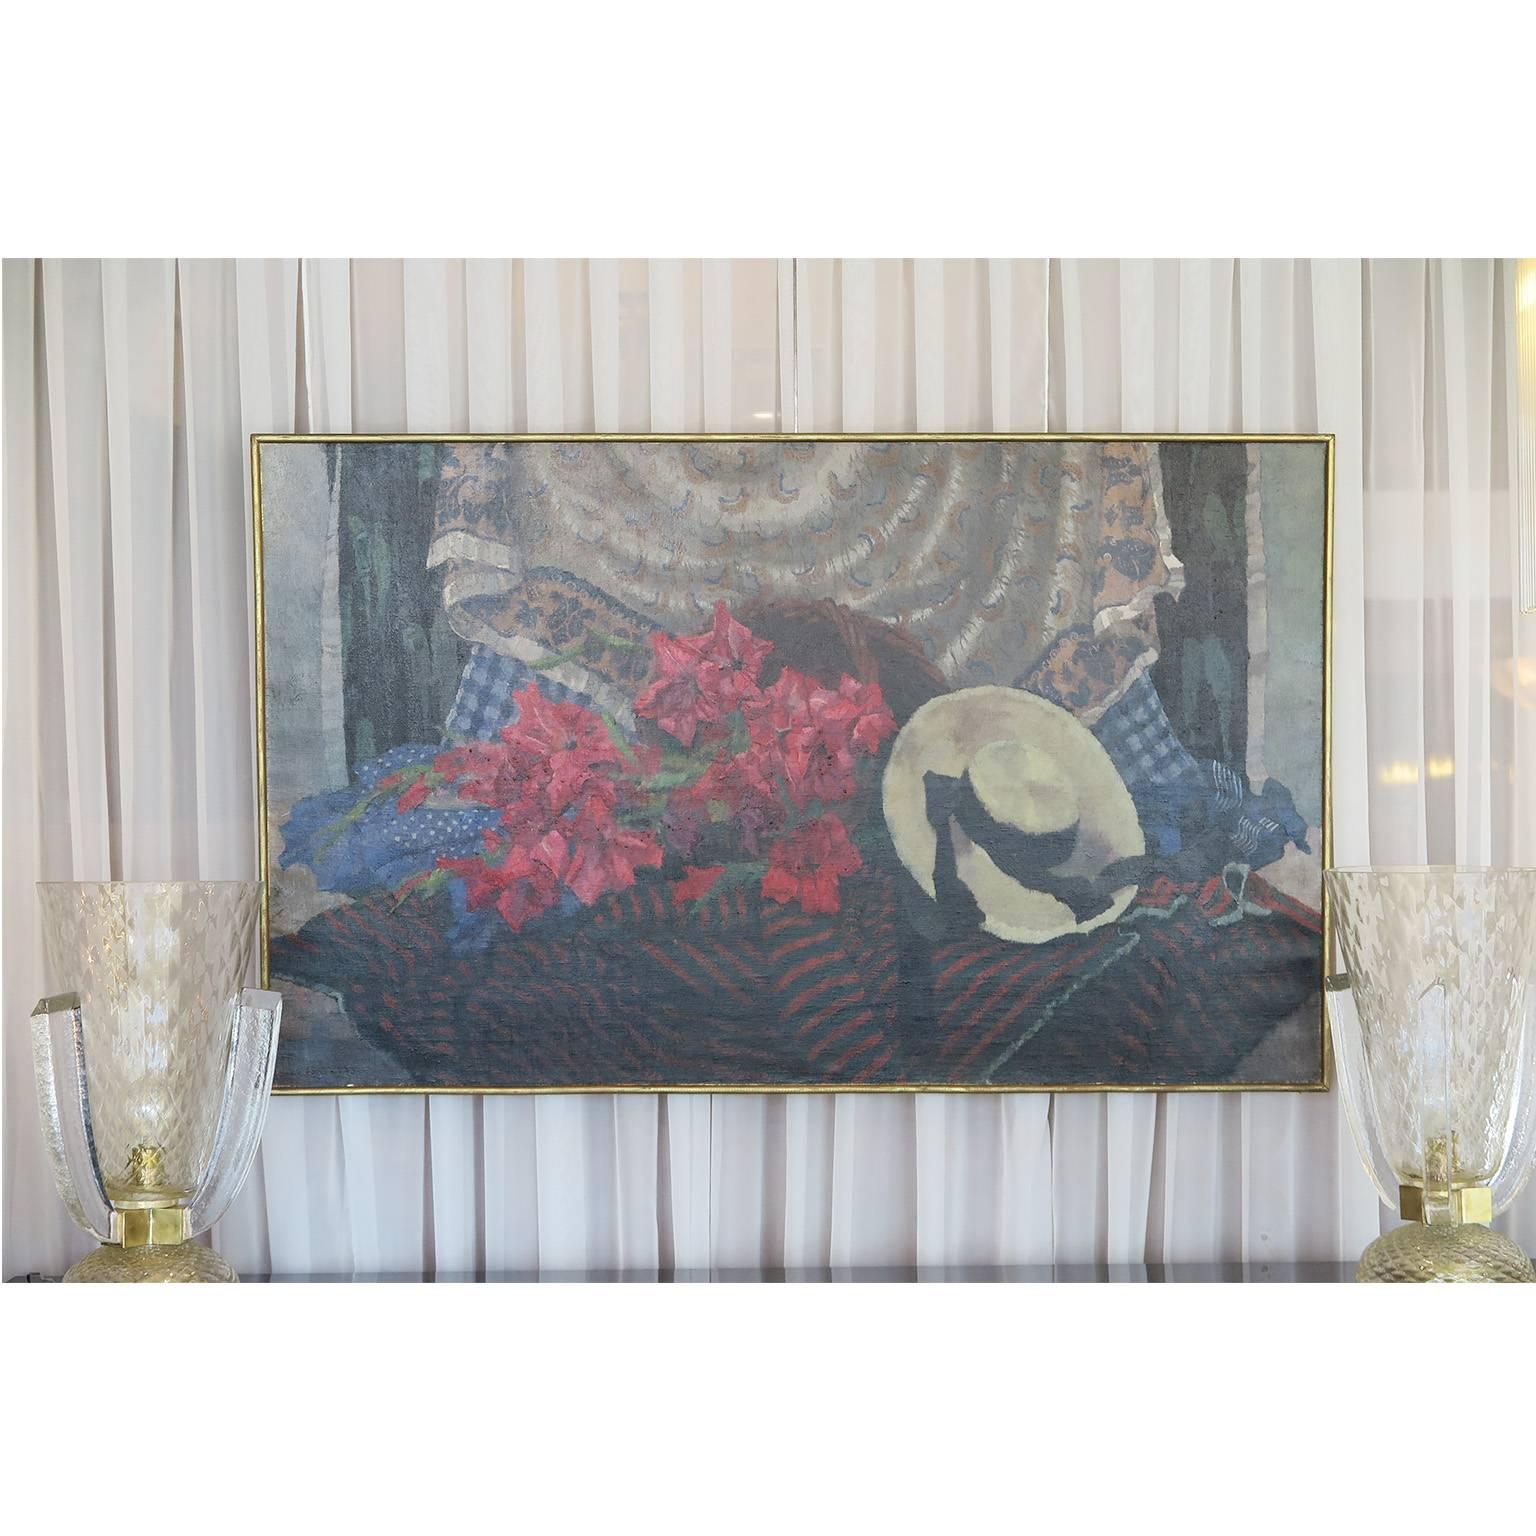 Still Life motif by French artist Zene Fountayne. Oil on canvas featuring a motif of a hat, flowers and draped fabric. His work was exhibited at the 1930 Salon of the Independents of Paris where he received the Prix Carot and exhibited at the Salon